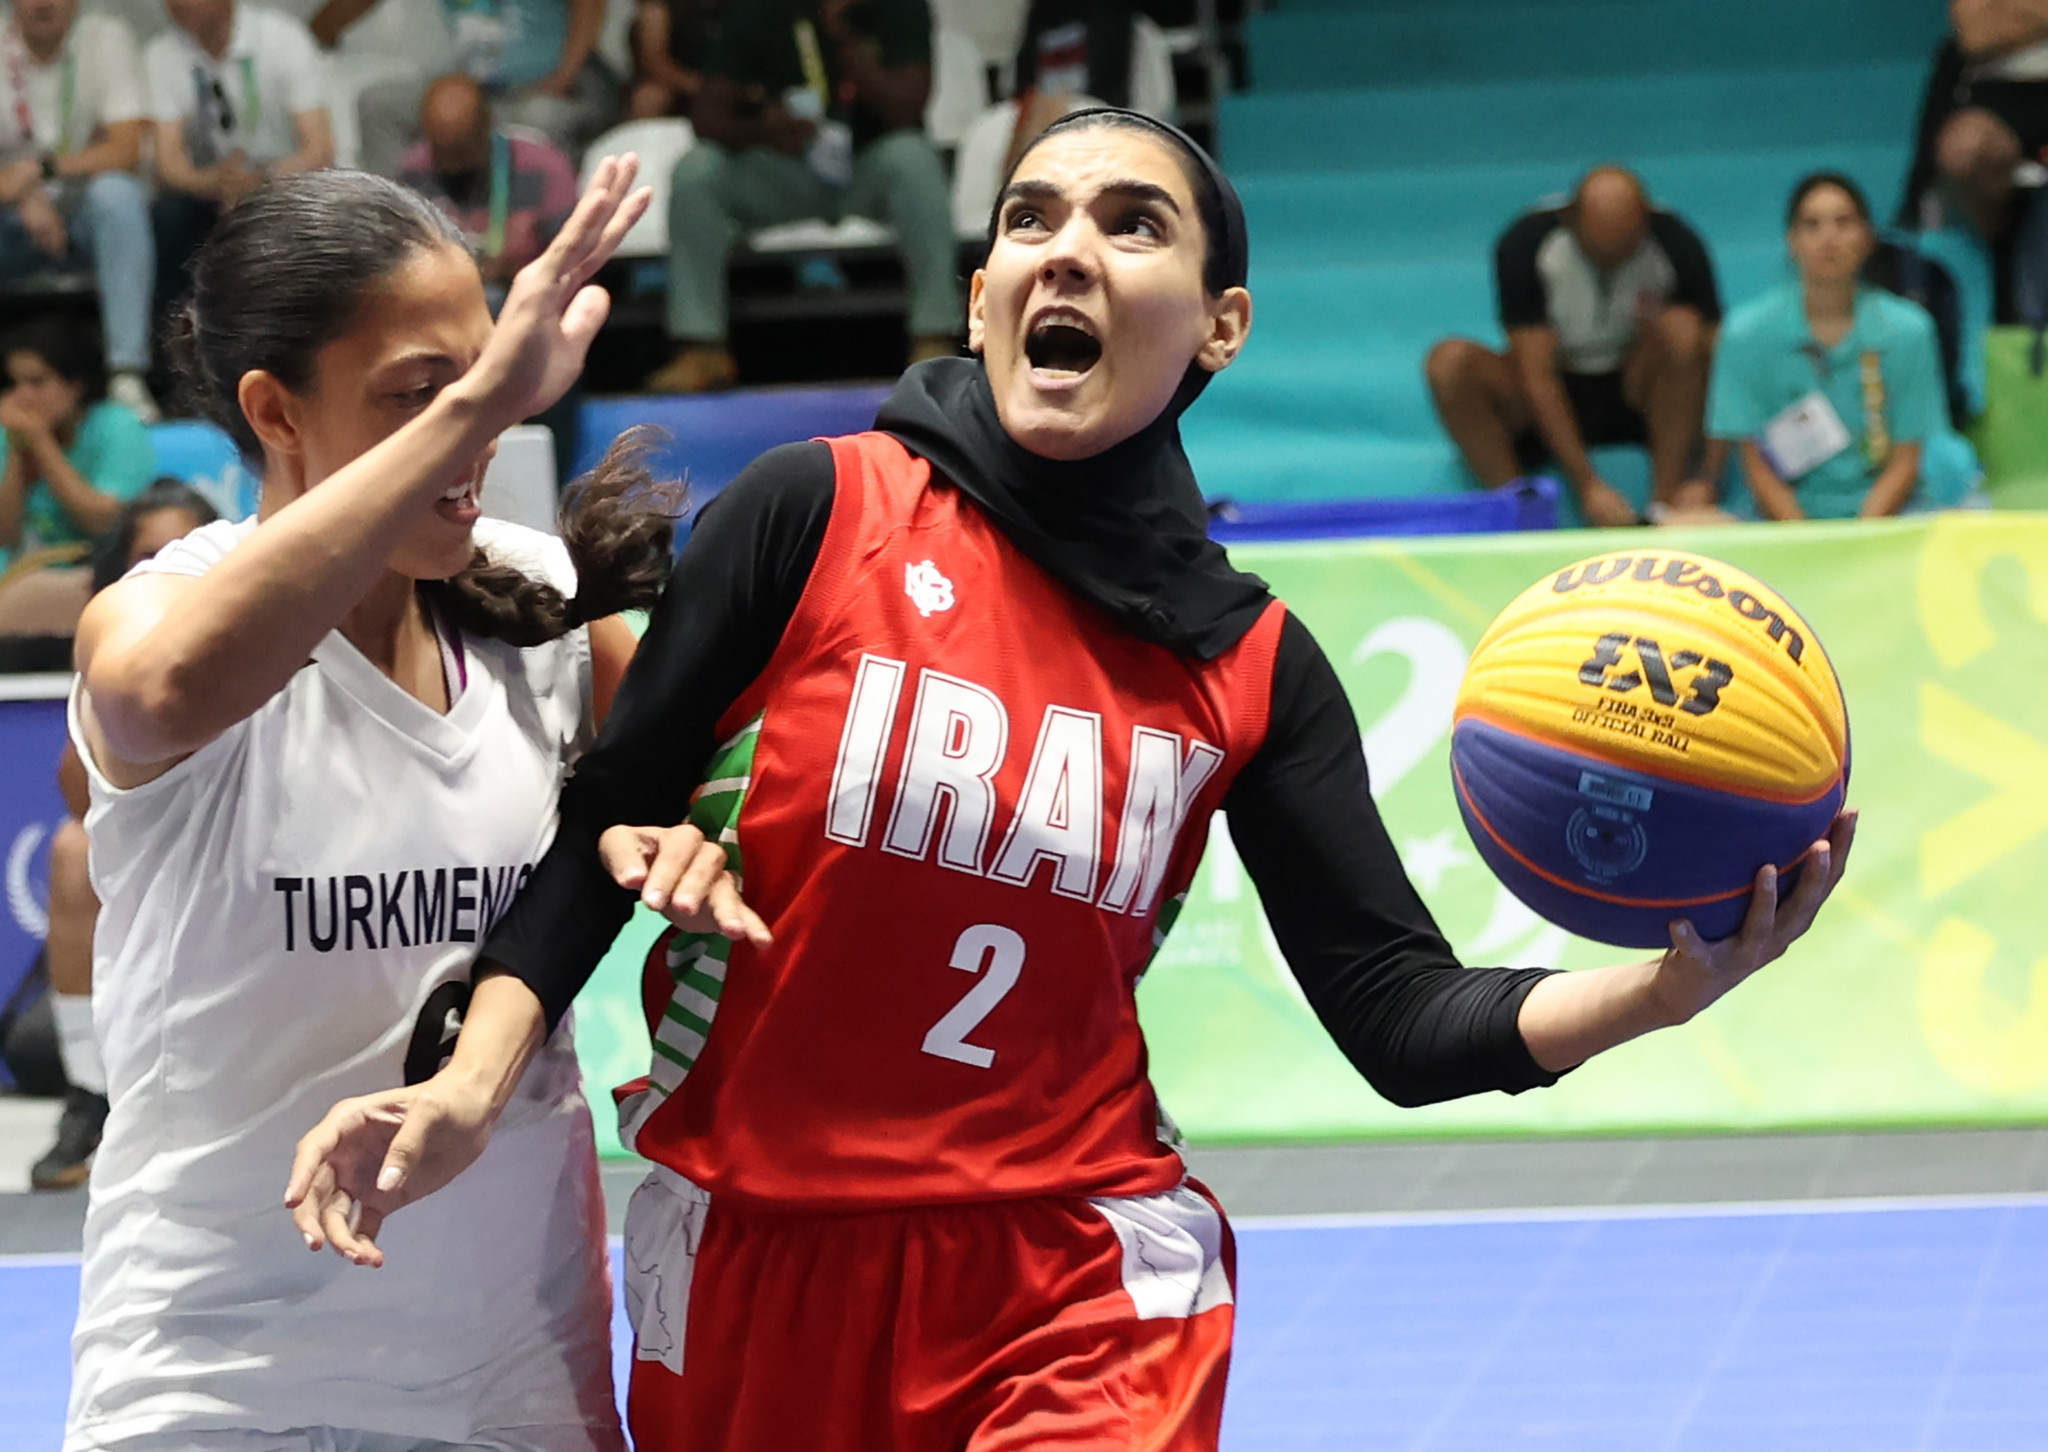 Iran and Turkmenistan go head-to-head in the women's 3x3 basketball event ©Konya 2021